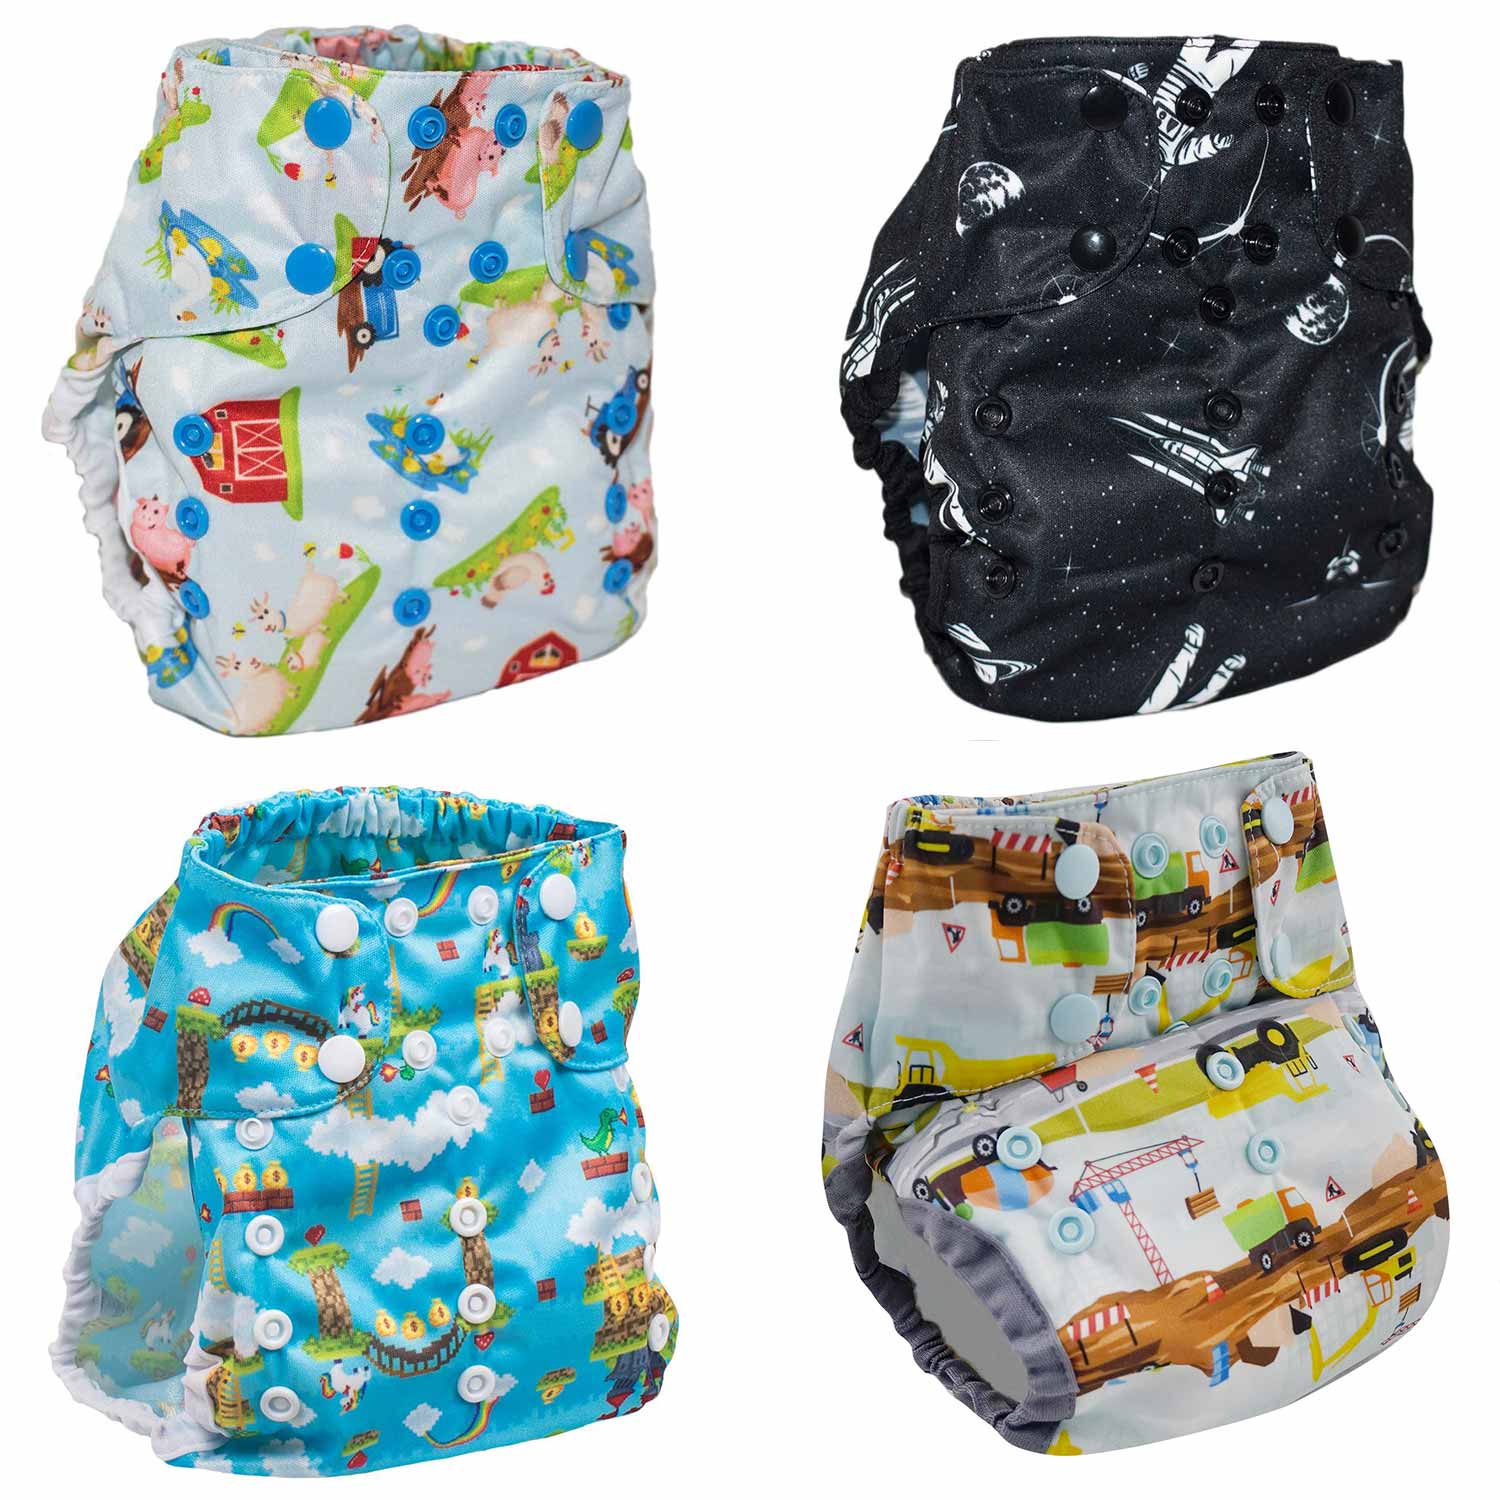 Smart Bottoms Too Smart 2.0 Cover cloth nappy savings pack - buy 3, get 1 free!